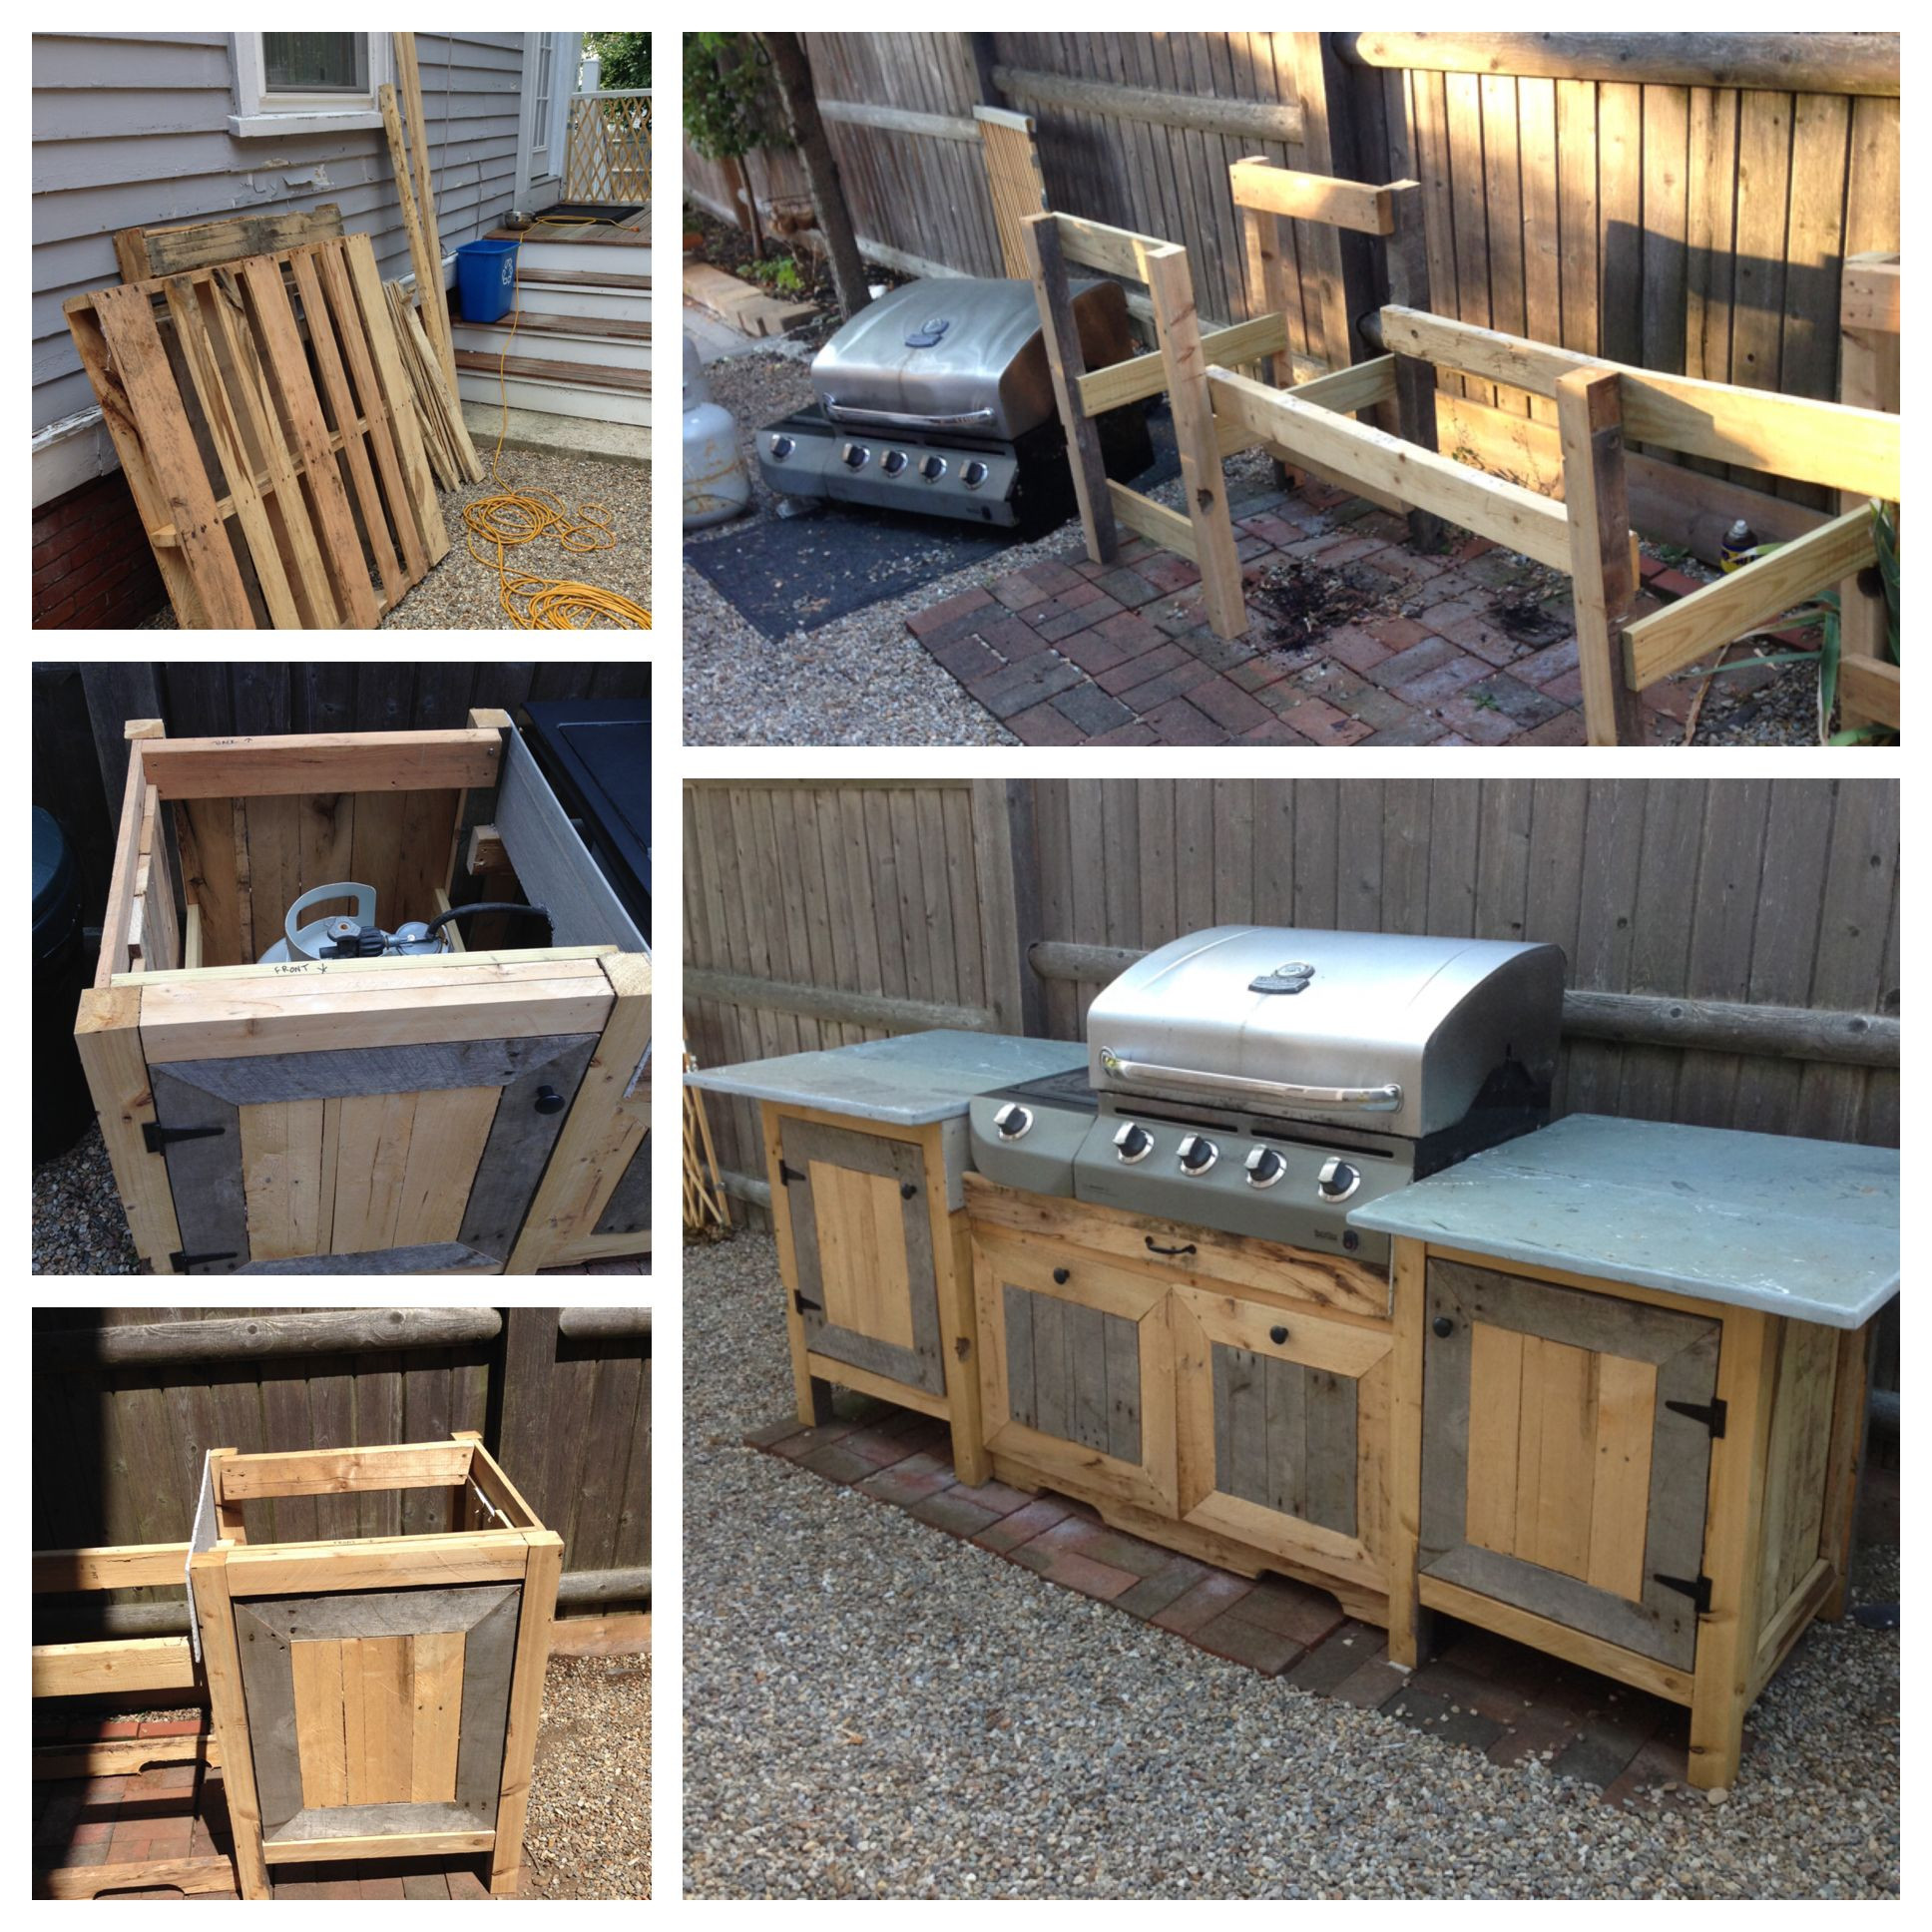 Pallet Outdoor Kitchen
 Outdoor kitchen made from pallets and upcycled bluestone